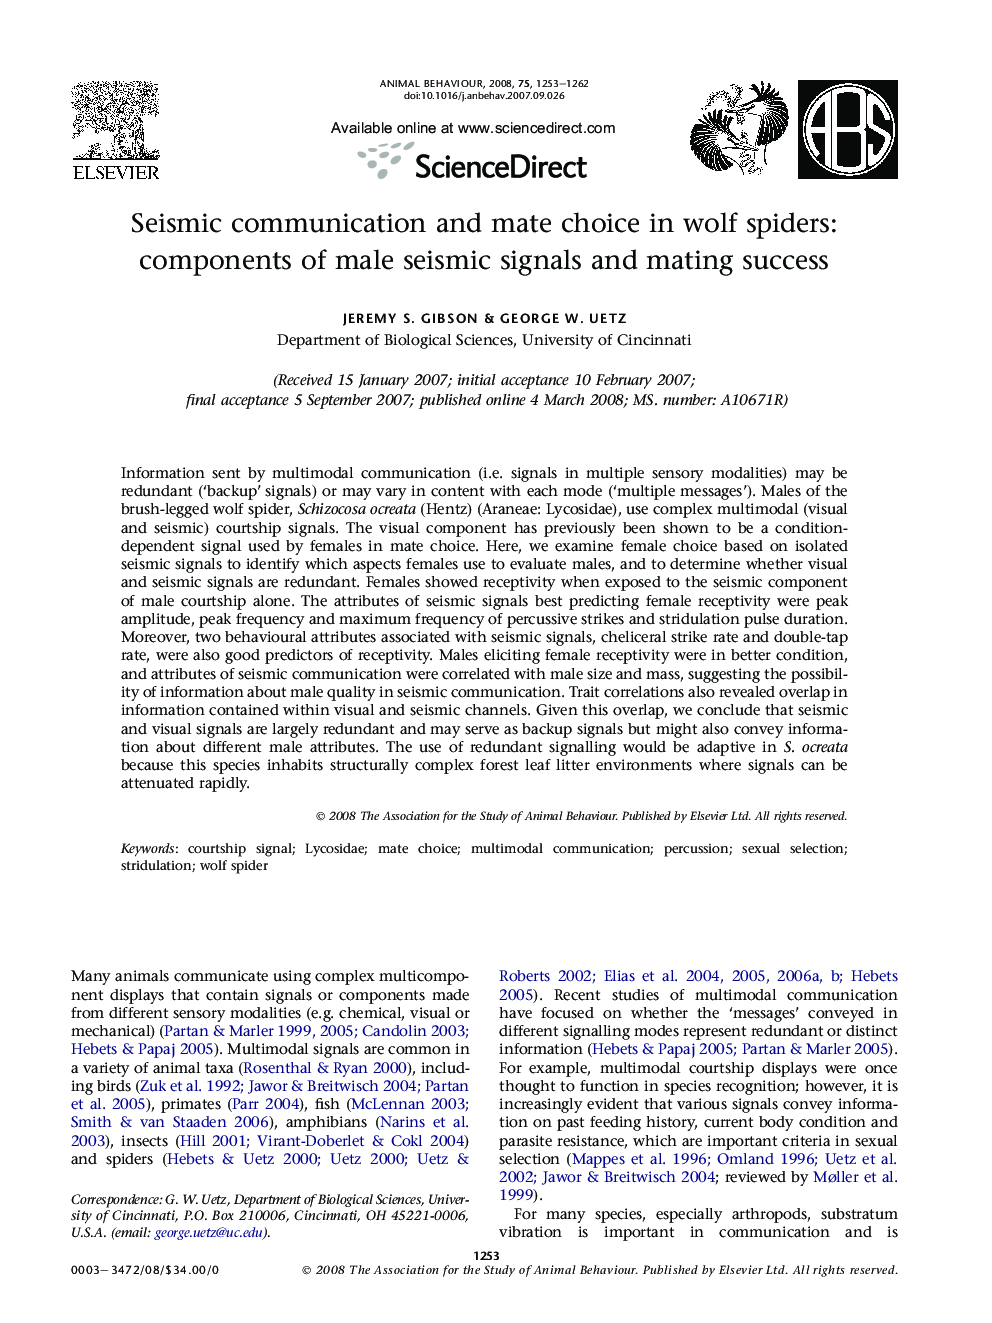 Seismic communication and mate choice in wolf spiders: components of male seismic signals and mating success